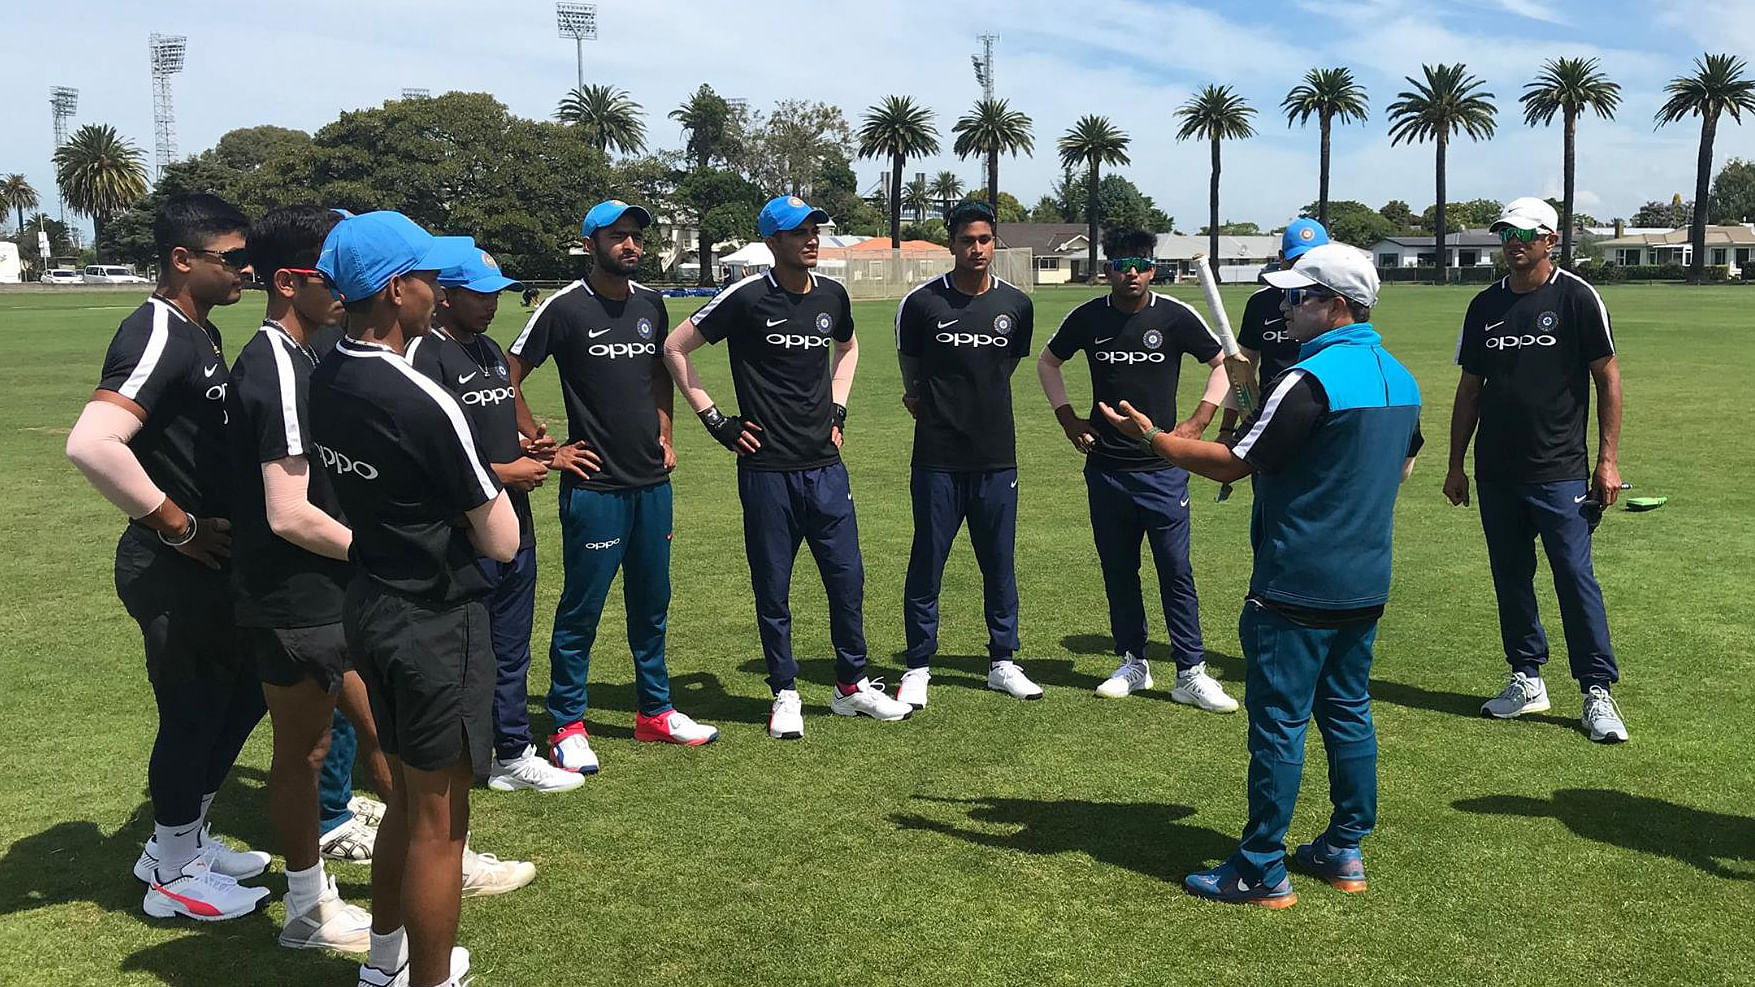 The Indian team under coach Rahul Dravid (extreme right) will be eyeing their fourth U-19 title.